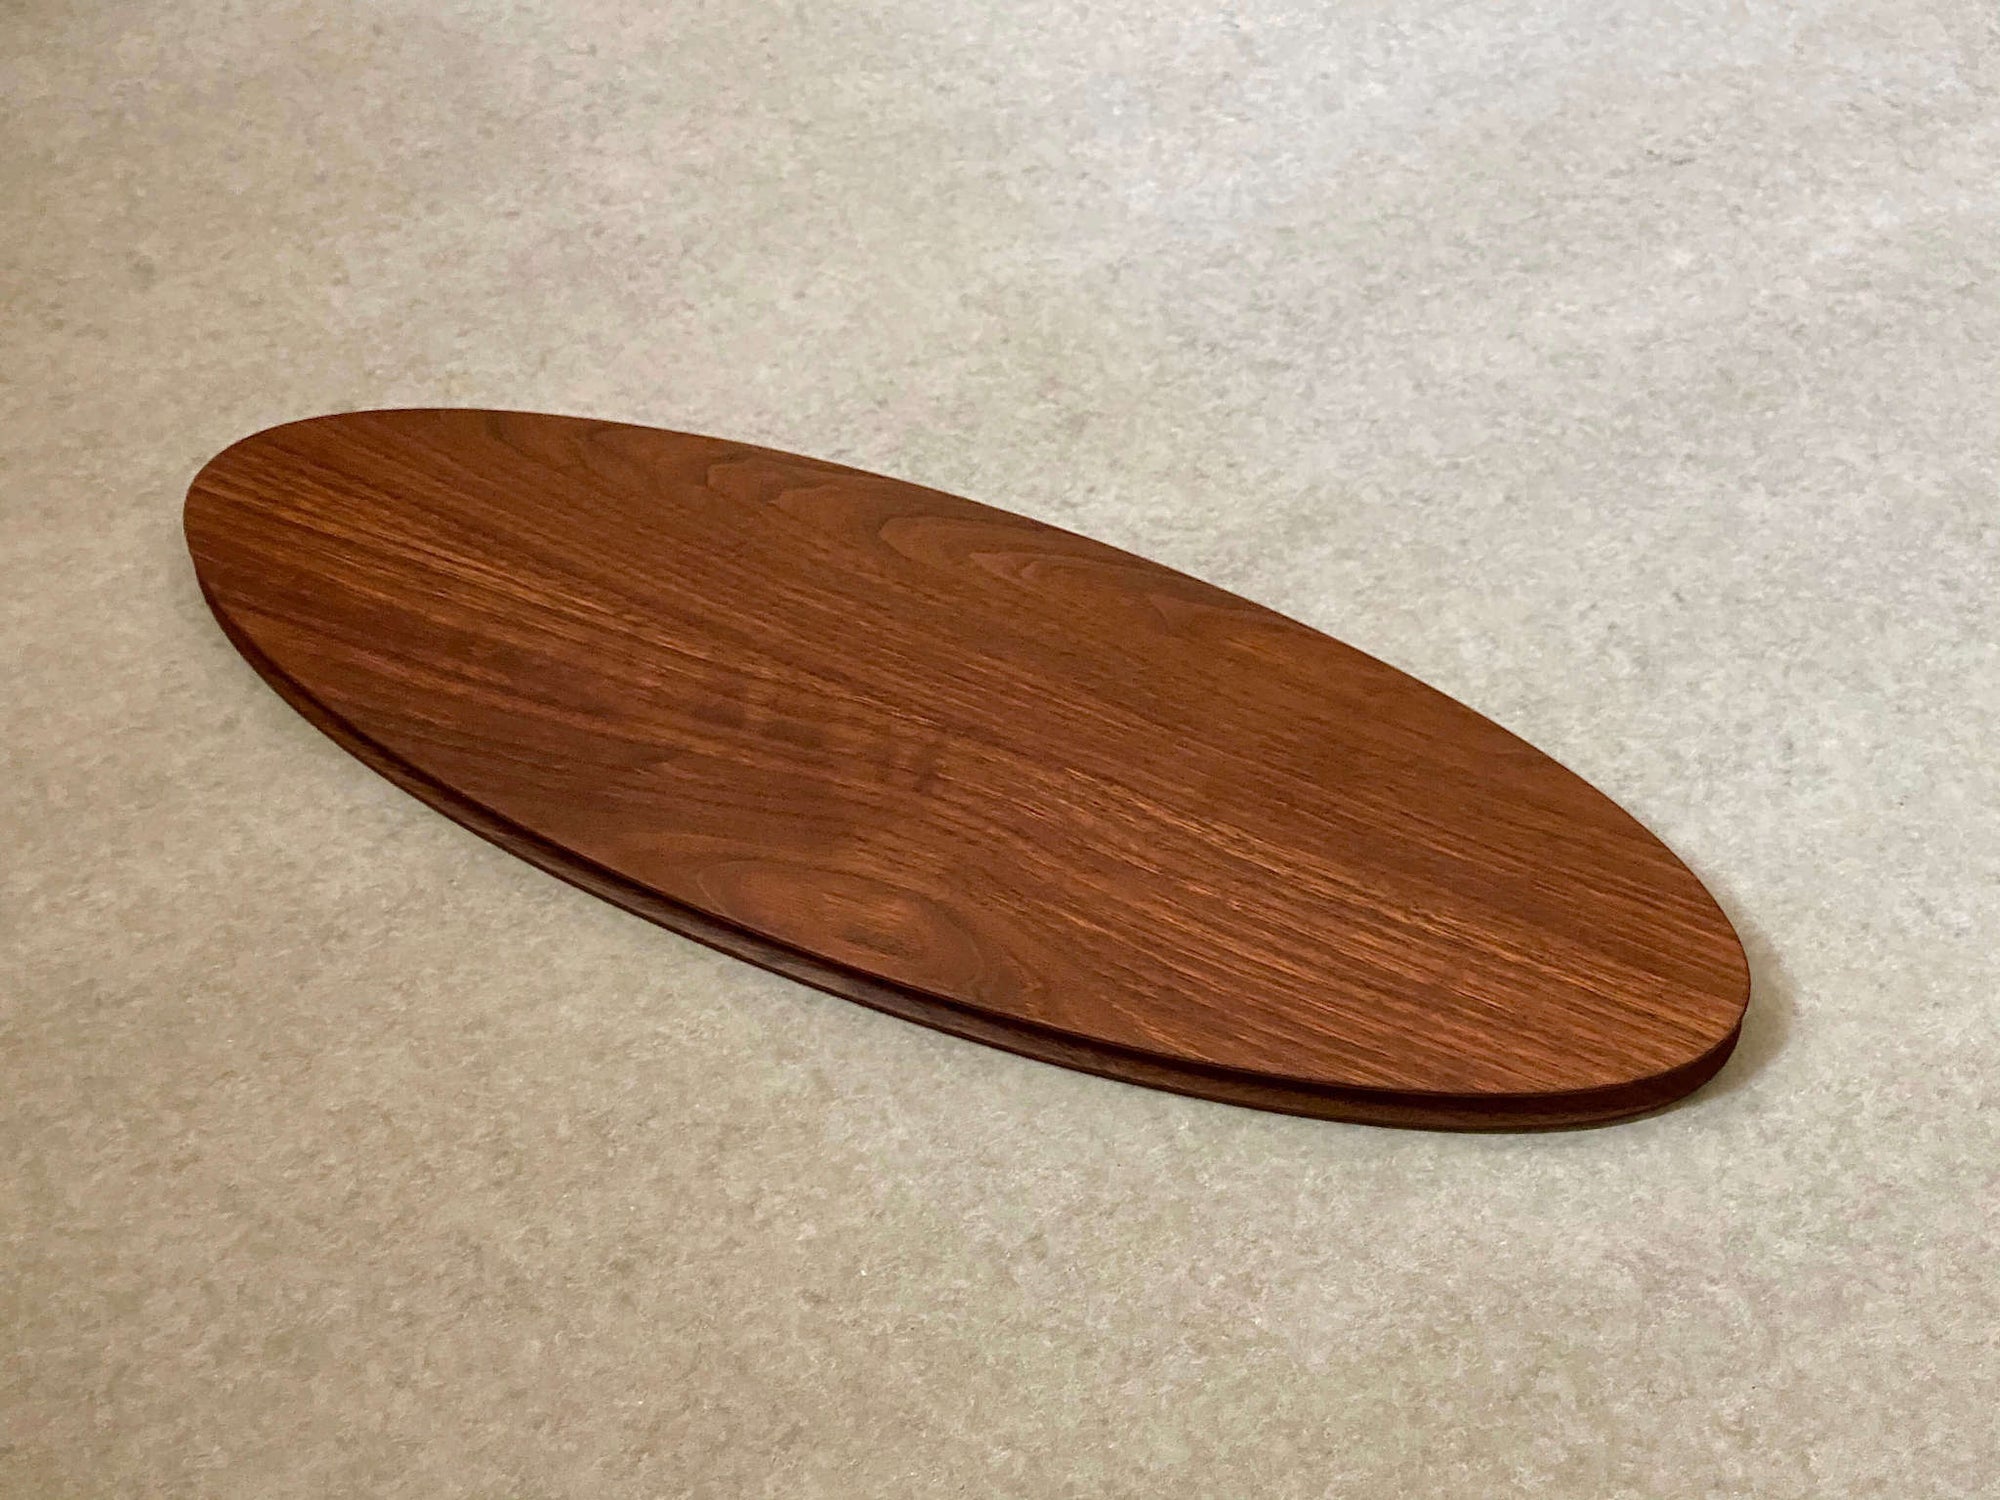 A large ellipse shaped cutting and serving board made of mahogany. Sculpted edges provide a nice detail.